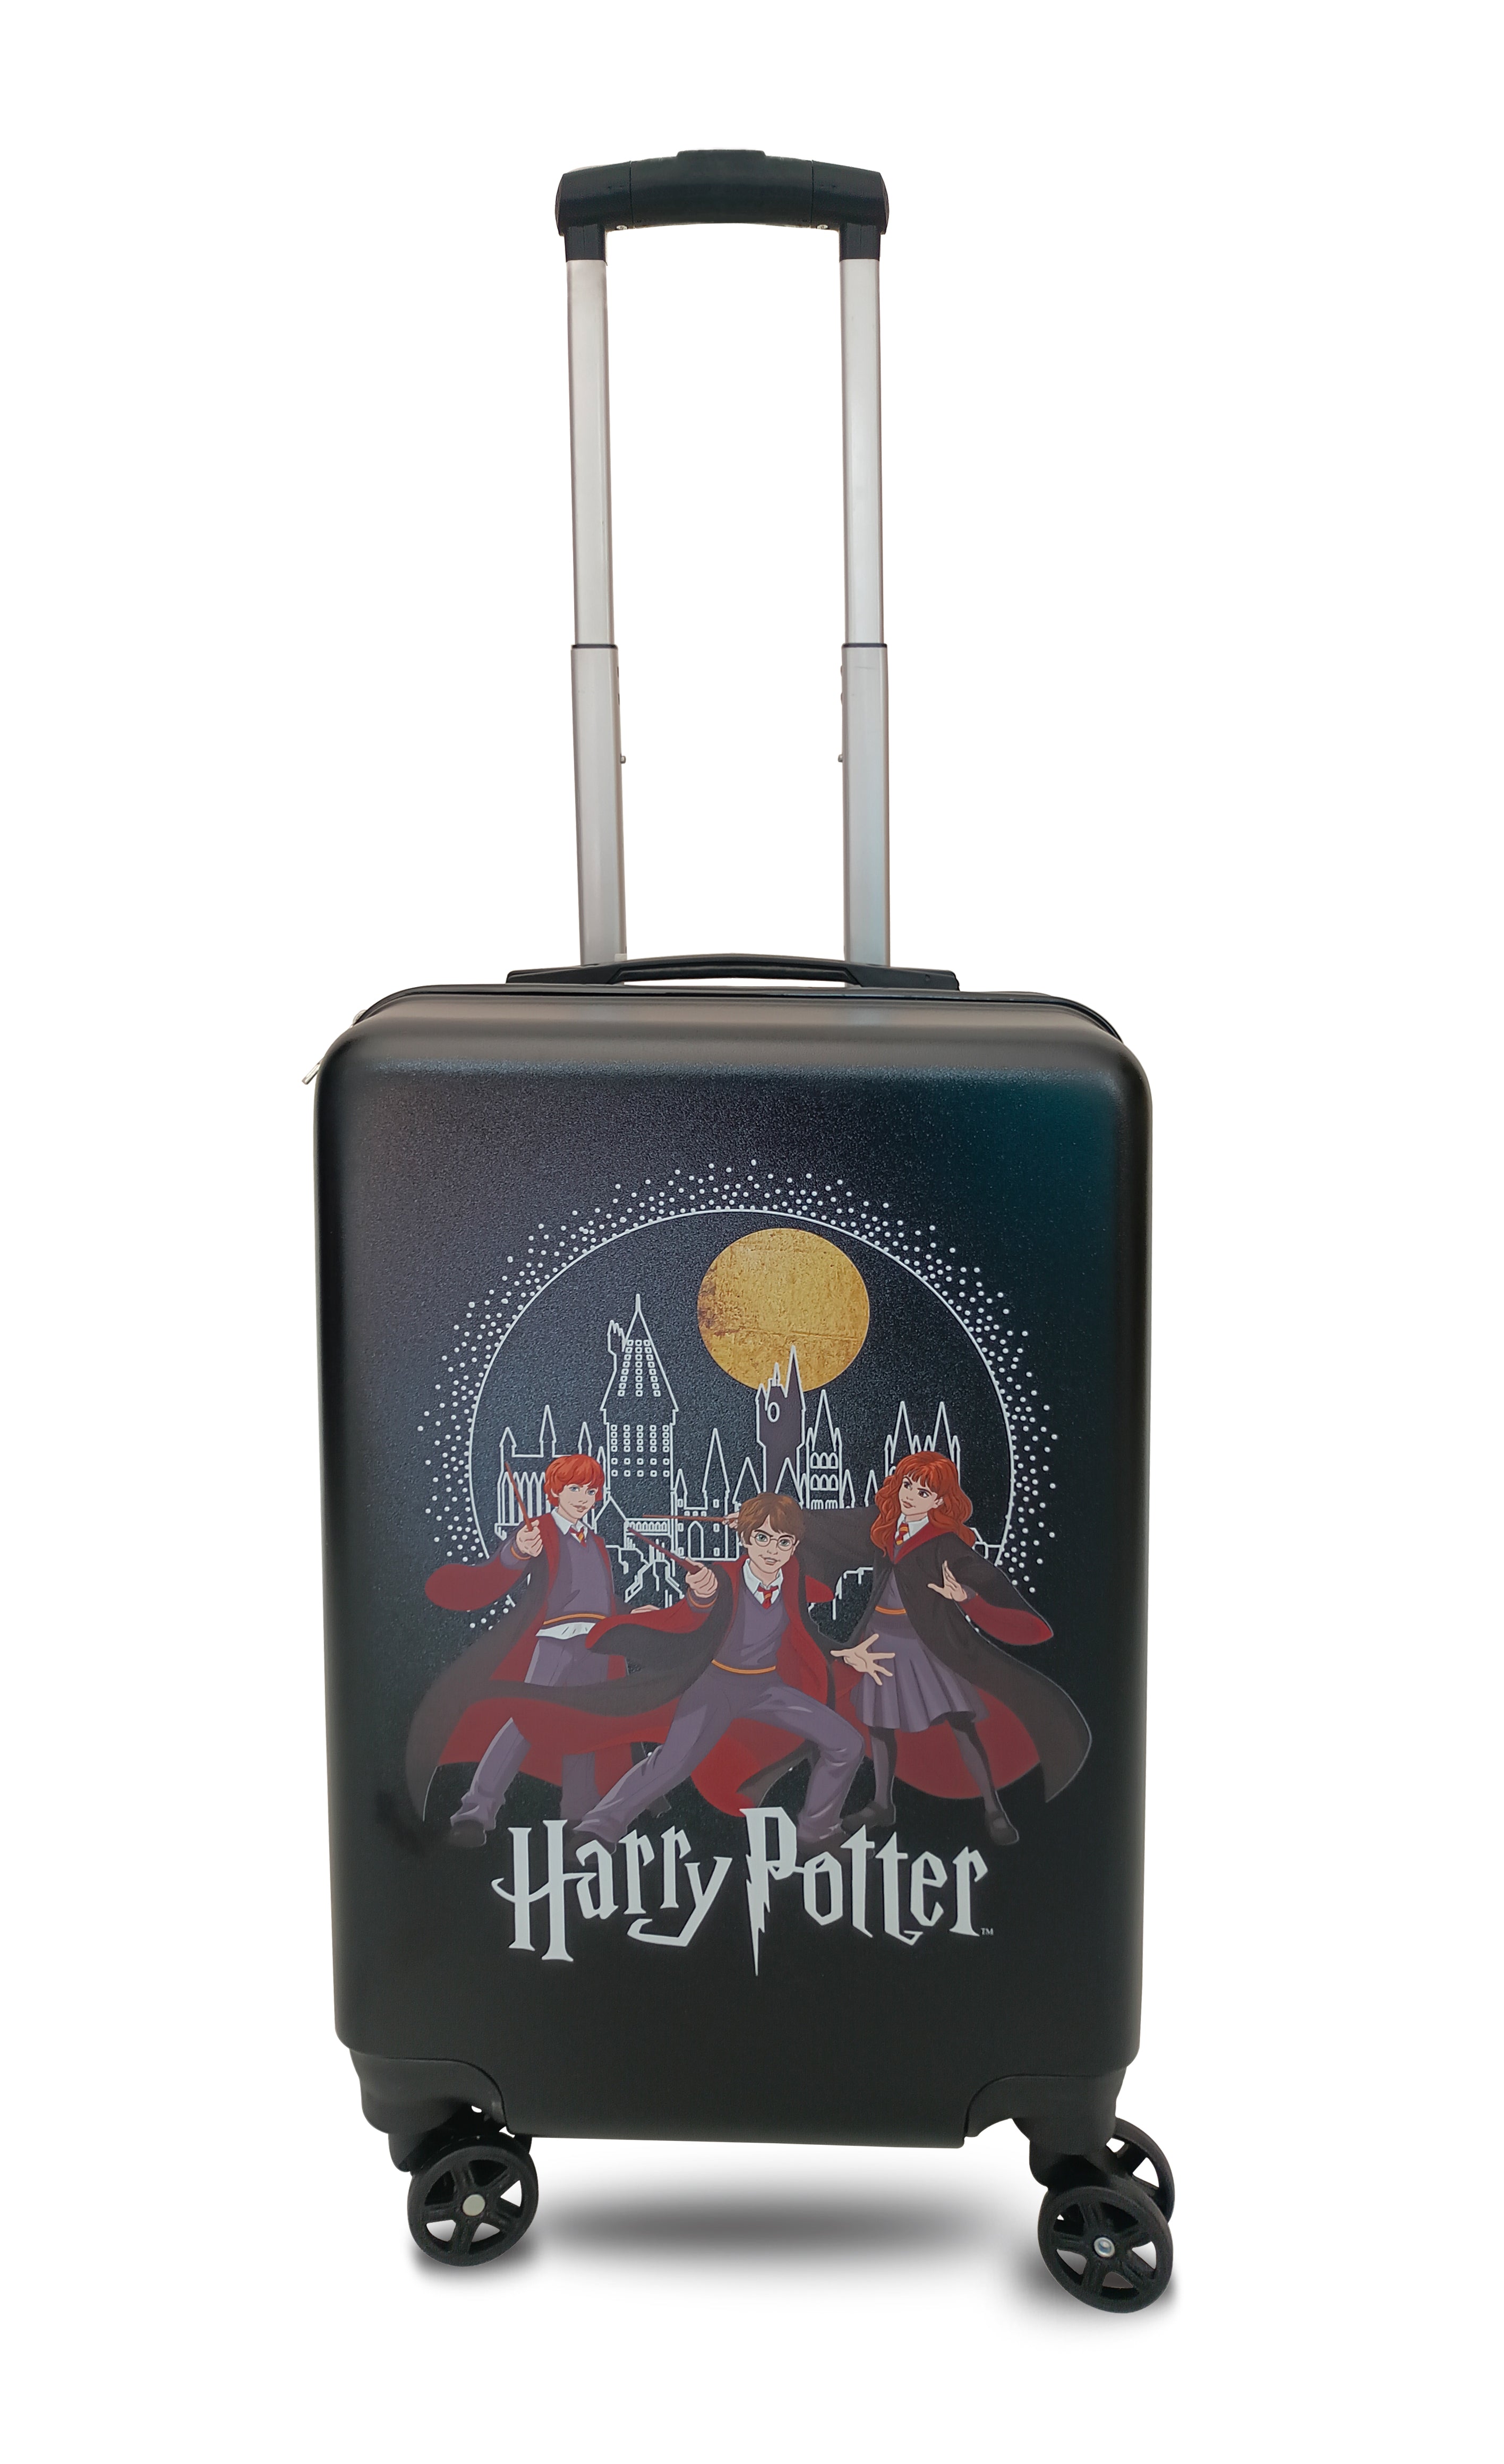 Harry Potter - 20in WB044 retro onboard suitcase - Black-1